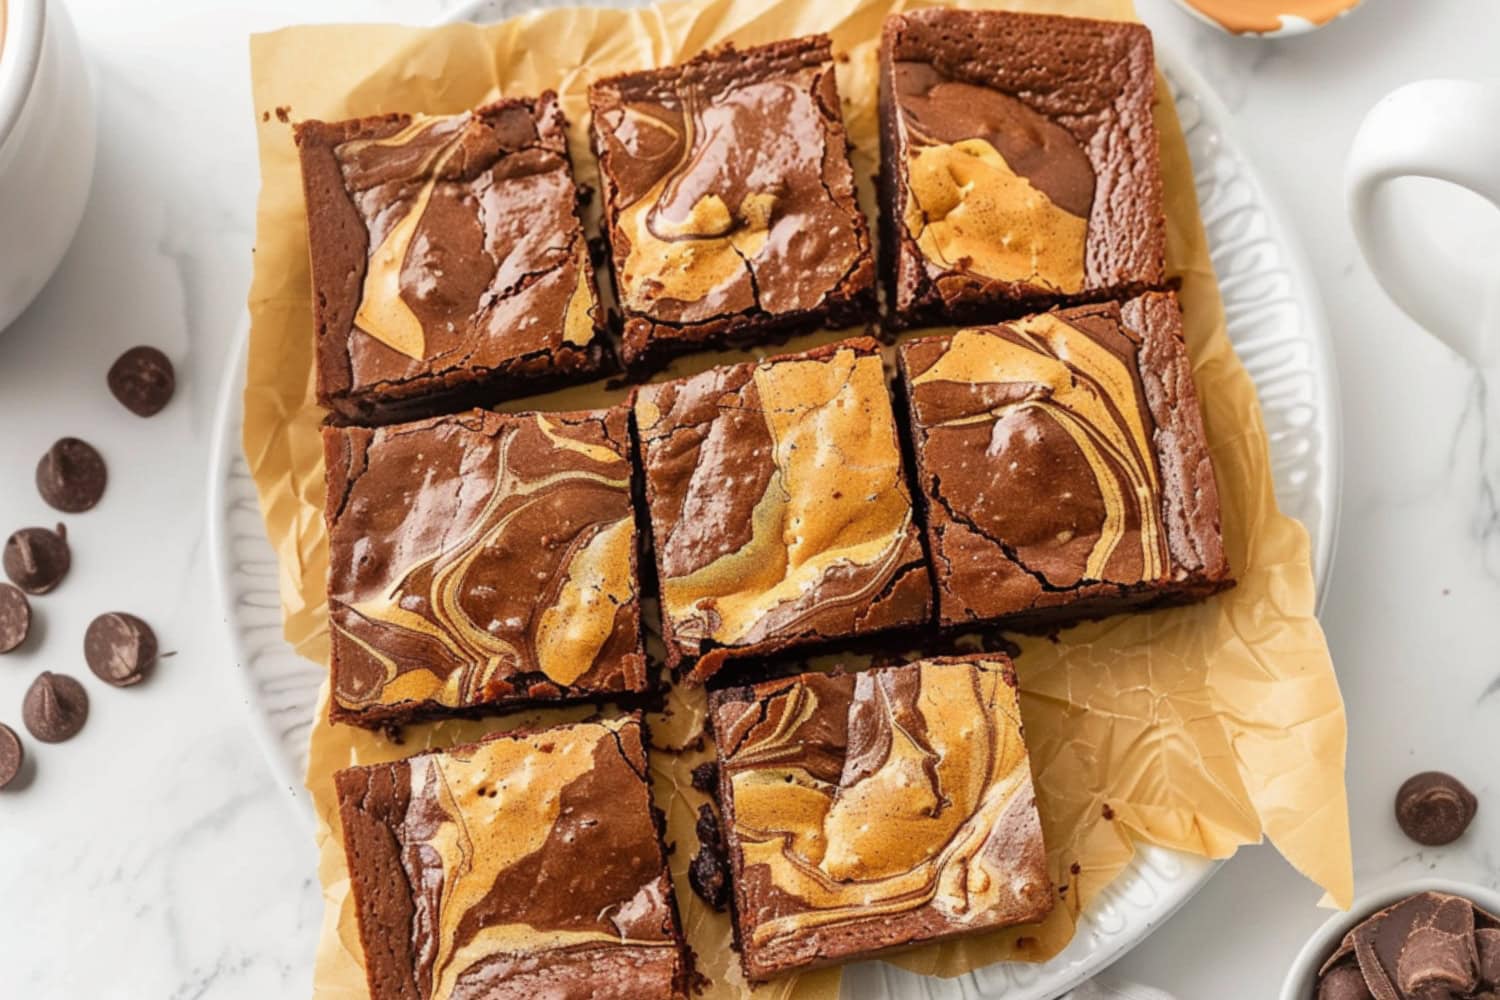 Slices of peanut butter brownies in a white plate.